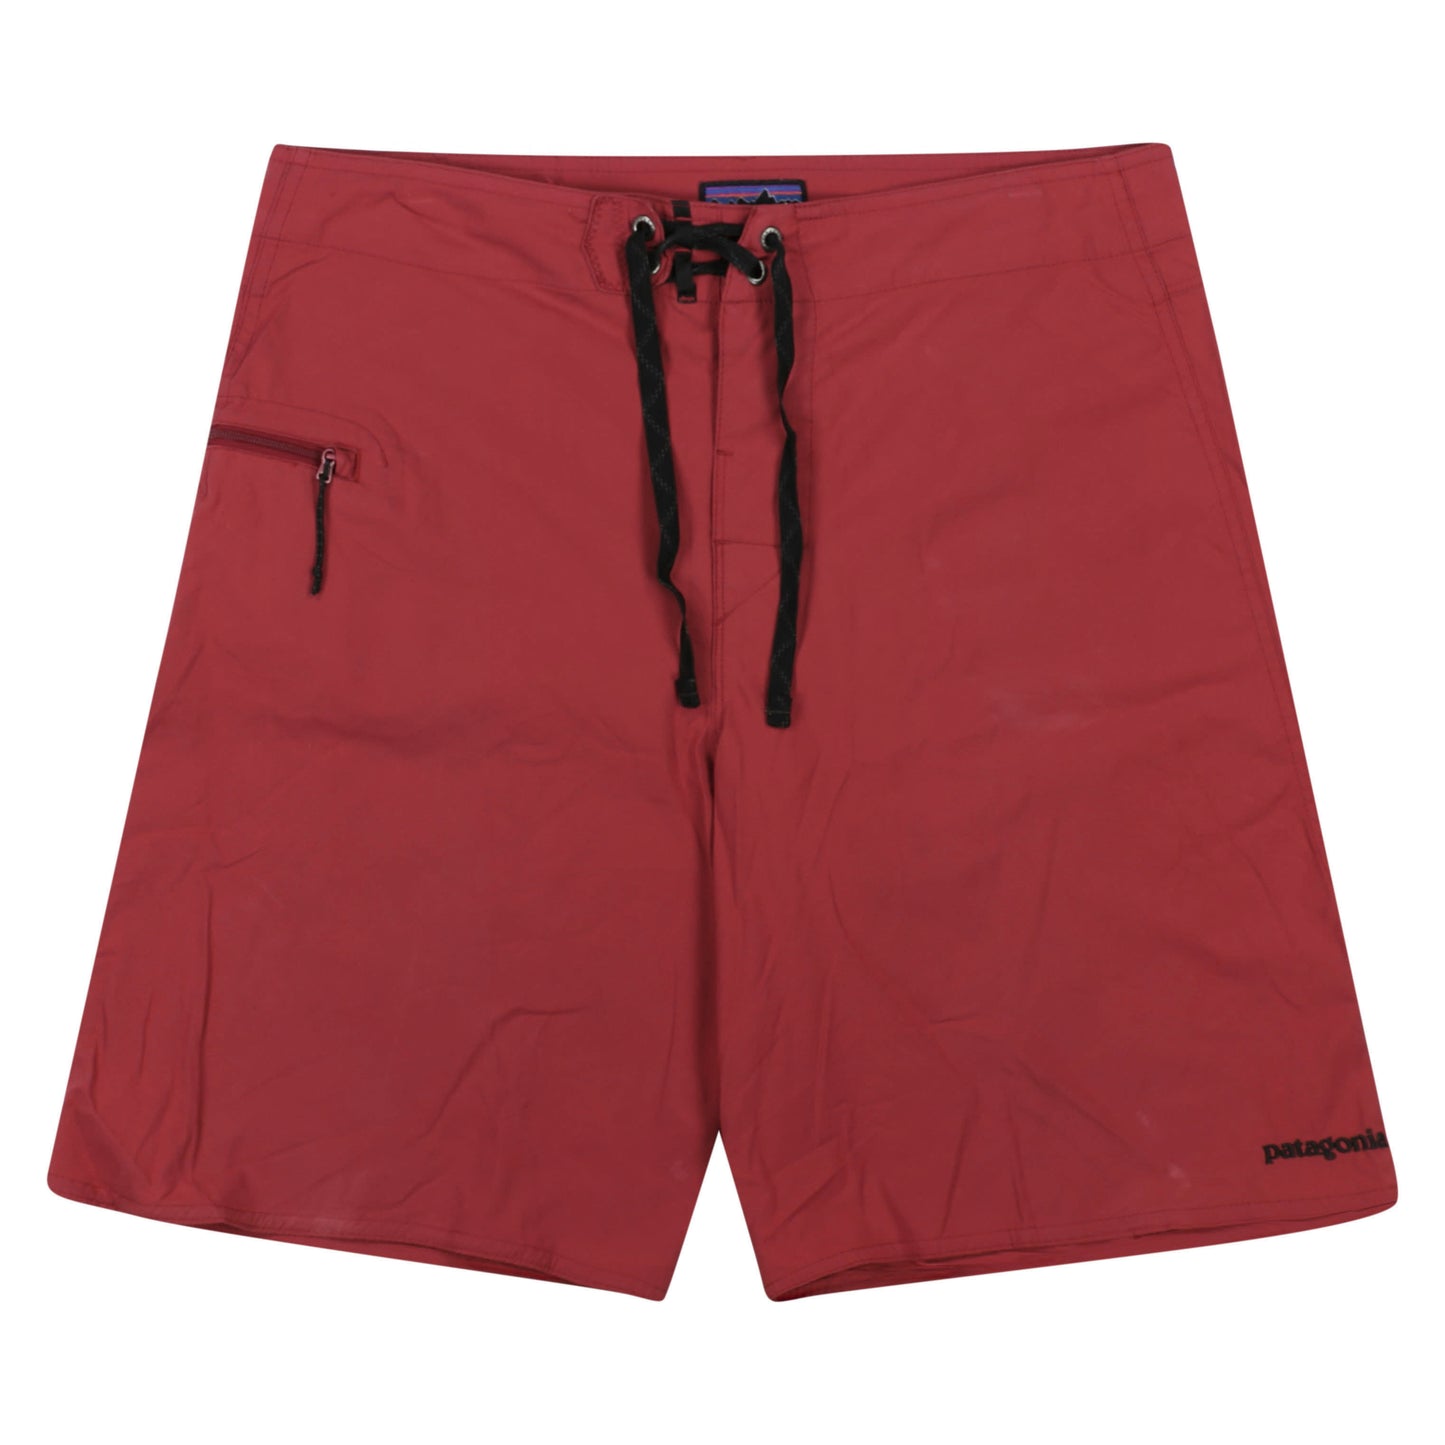 Men's Stretch Planing Board Shorts - 20"